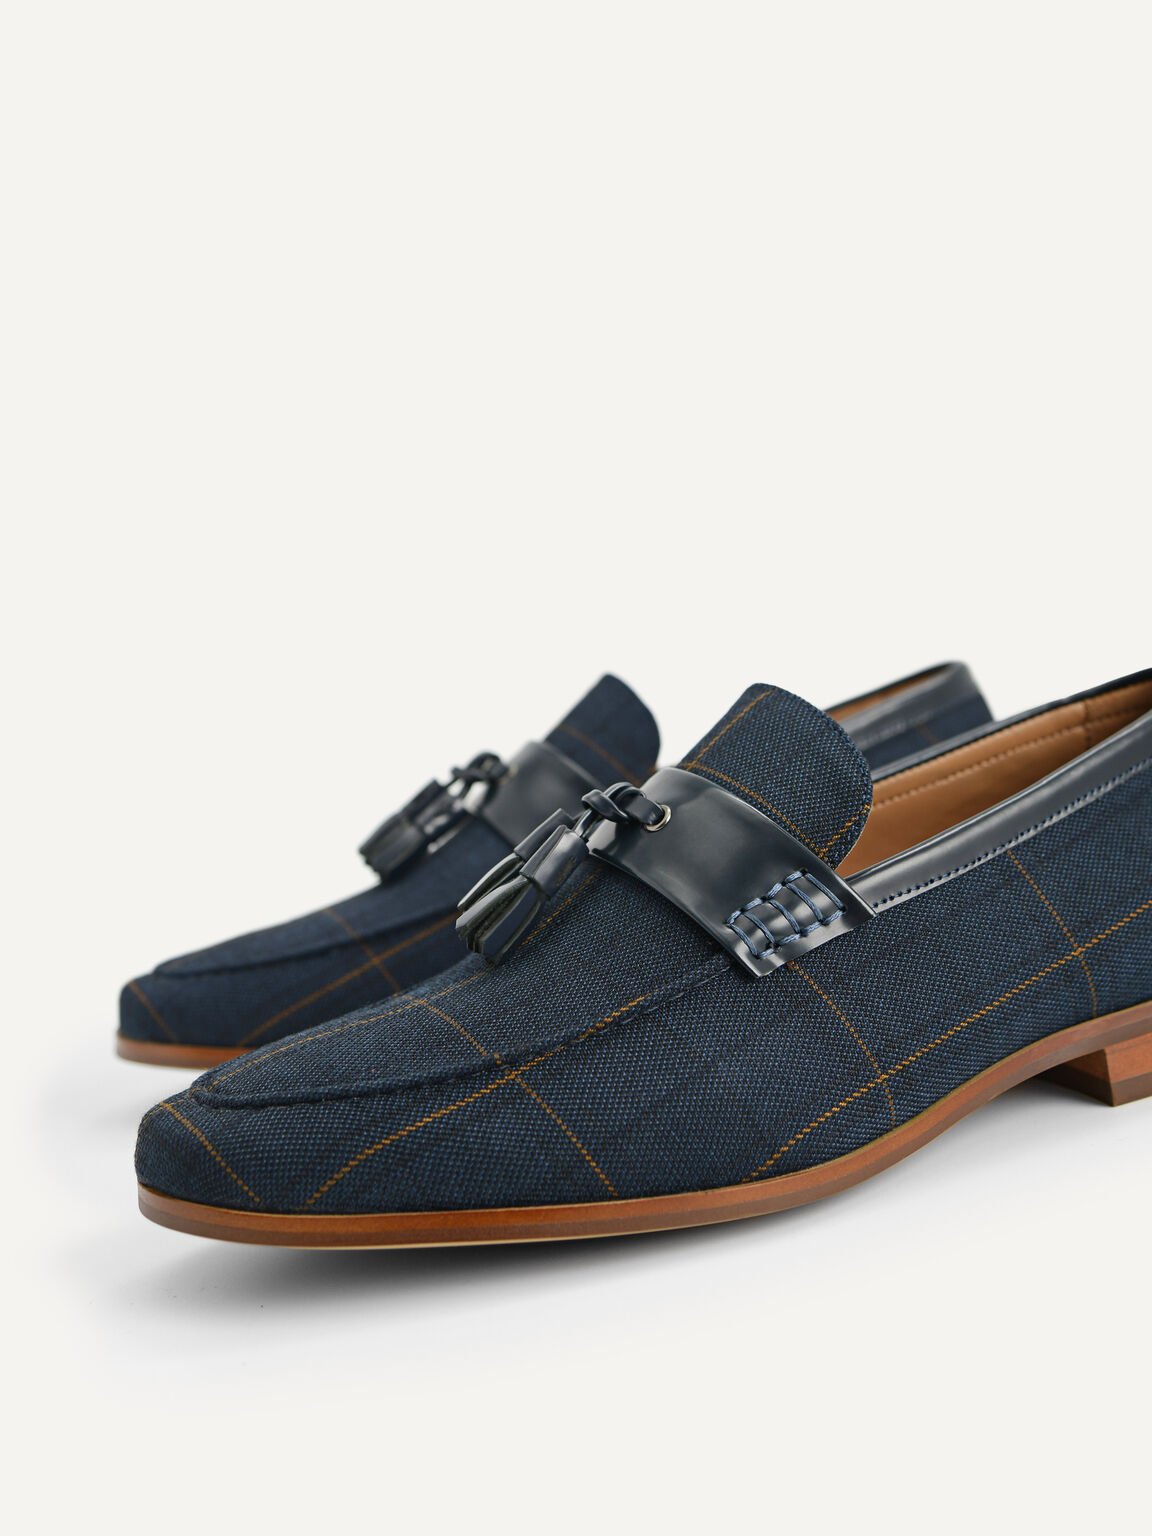 Leather Tasselled Loafers, Navy, hi-res